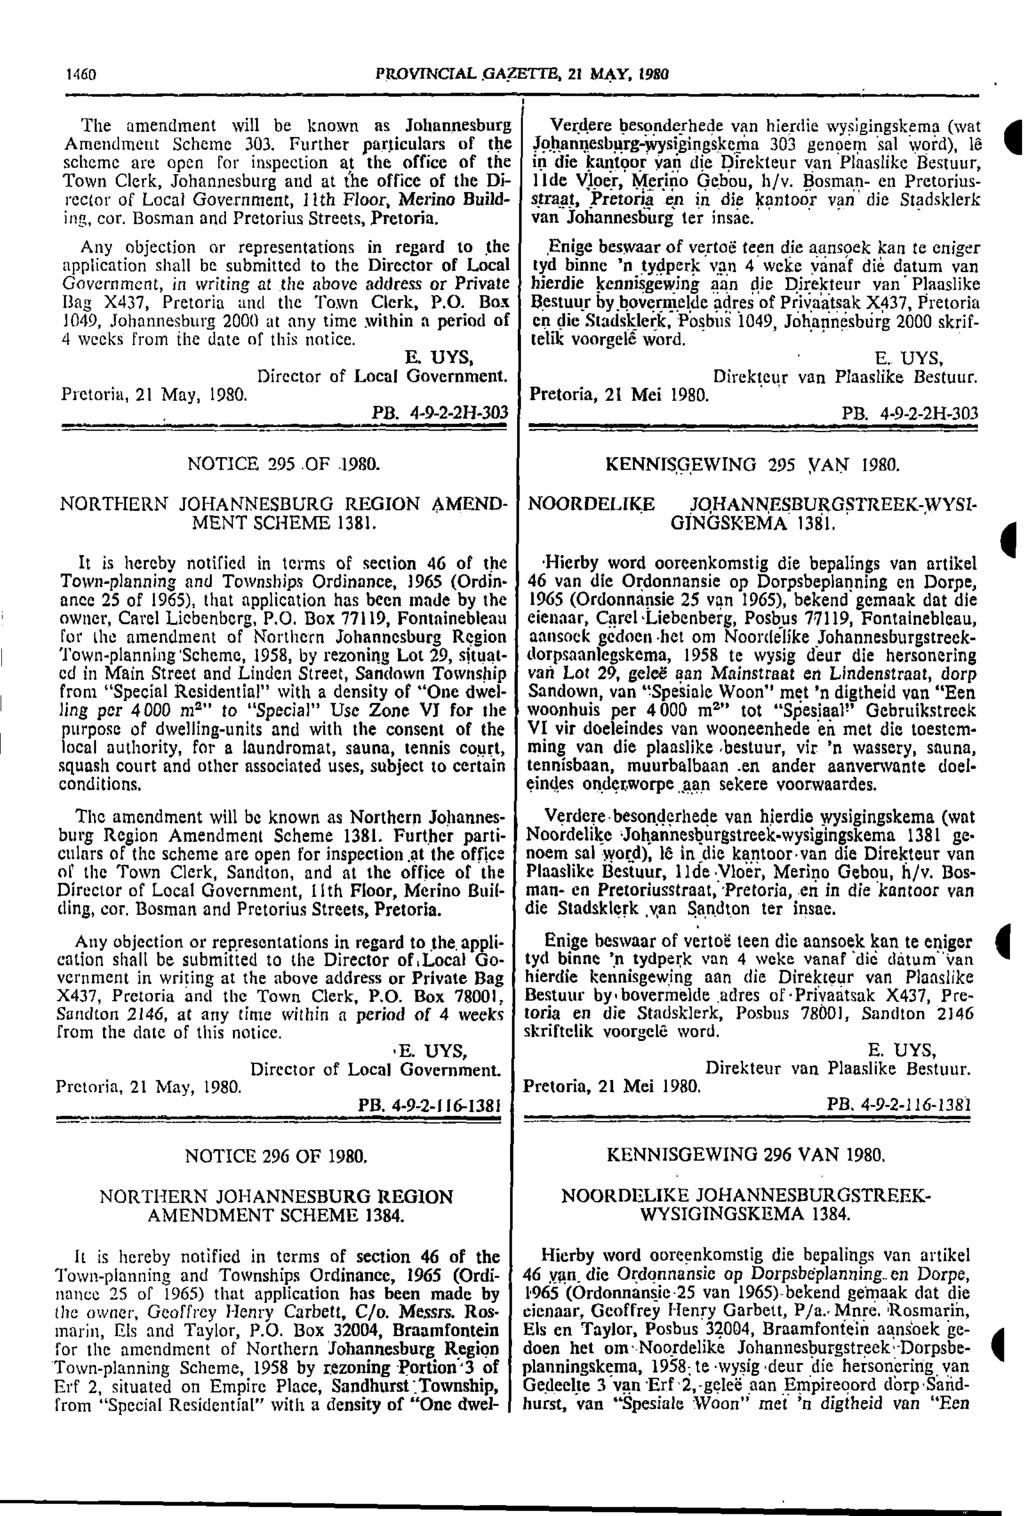 1460 PROVINCIAL GAZETTE 21 MAY 1980 The amendment will be known as Johannesburg Verdere besonderhede van hierdie wysigingskema (wat A Amendment Scheme 303 Further particulars of the